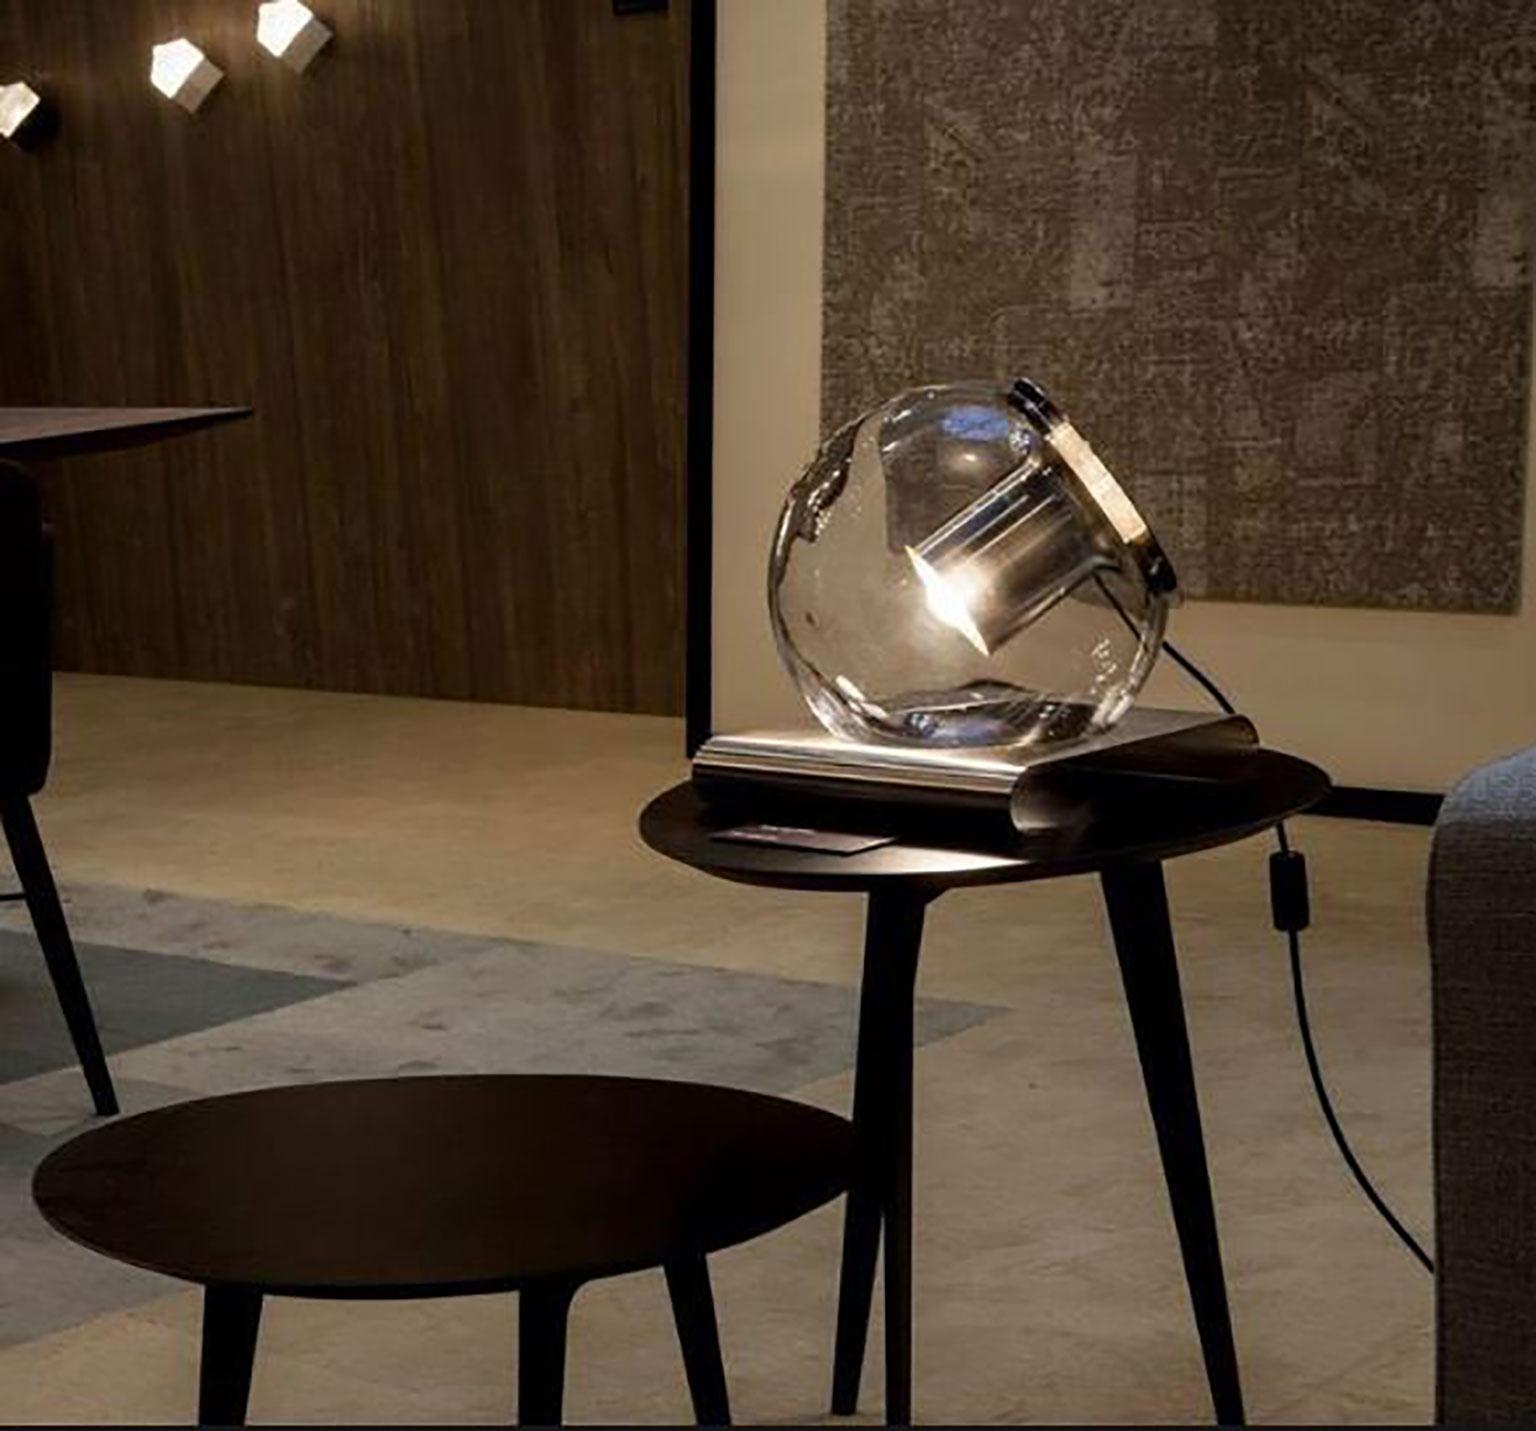 The Globe table lamp designed by Joe Colombo for Oluce. It is a simplistic and appealing design manufactured from hand-blown glass, producing a remarkable ambient light with the help of an internal metal reflector. The twisted metal reflector (as